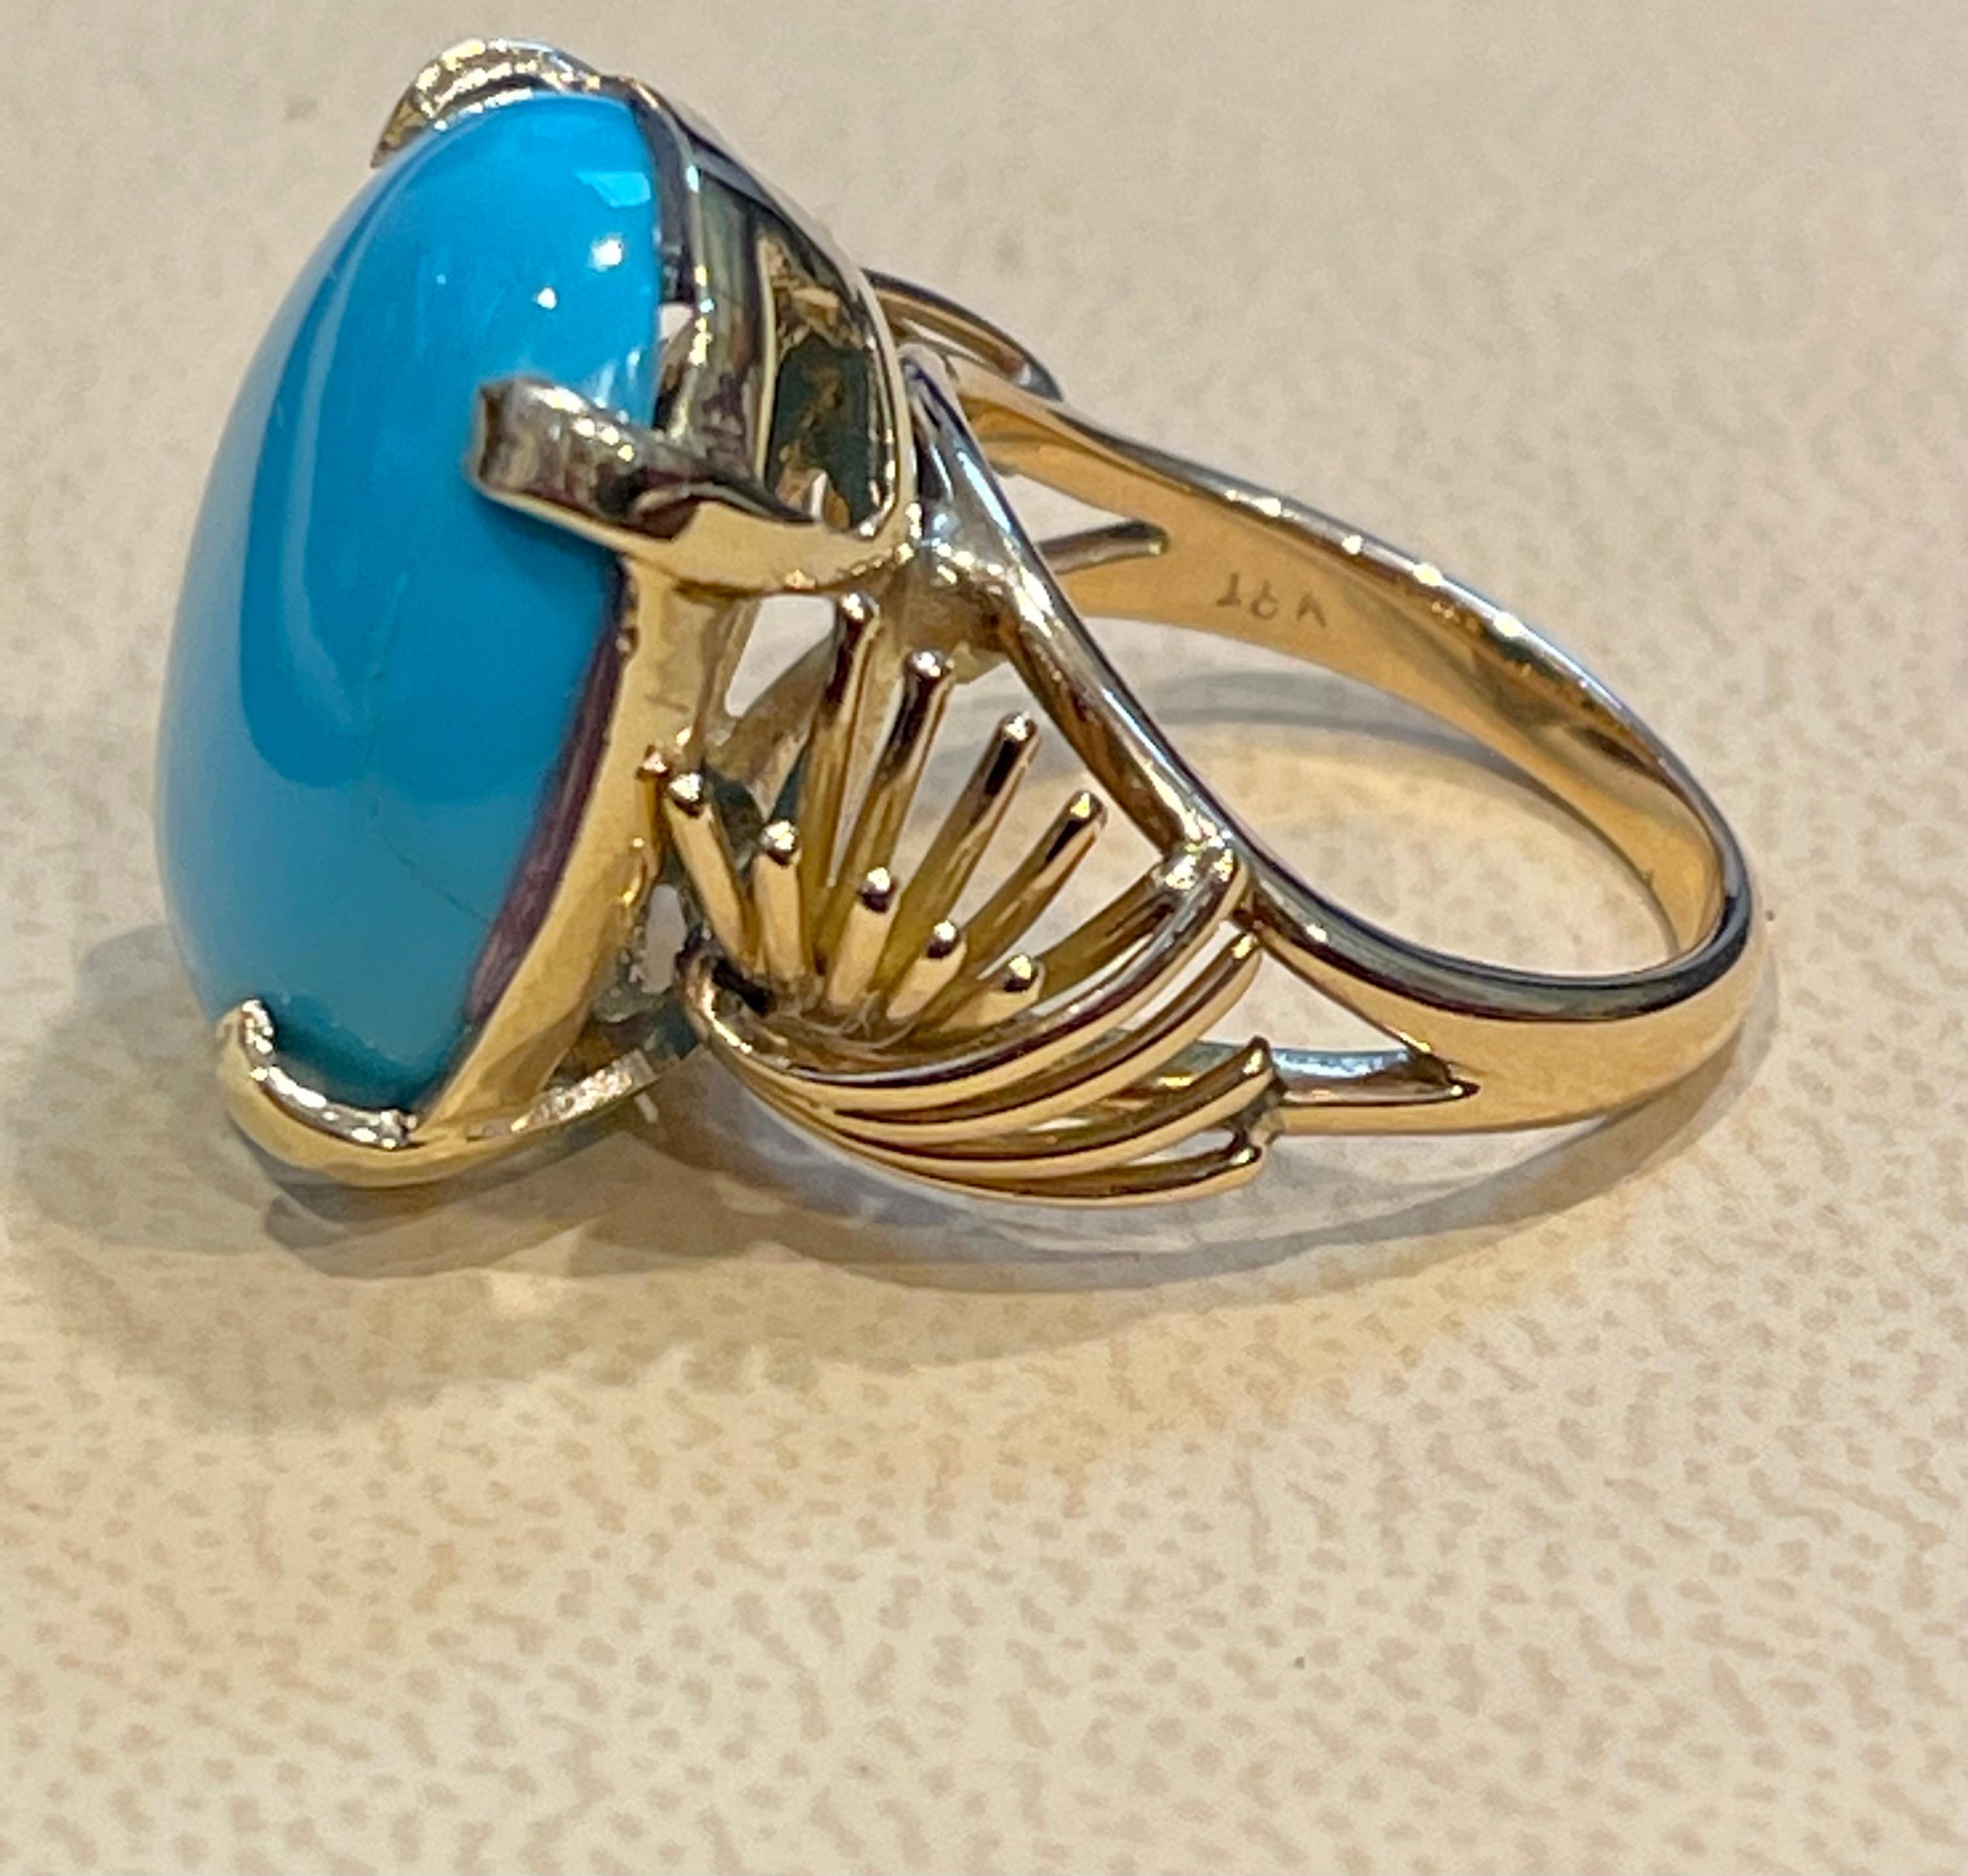 Vintage 12 Ct Natural Oval Sleeping Beauty Turquoise Ring, 14 Kt Yellow Gold In Excellent Condition For Sale In New York, NY